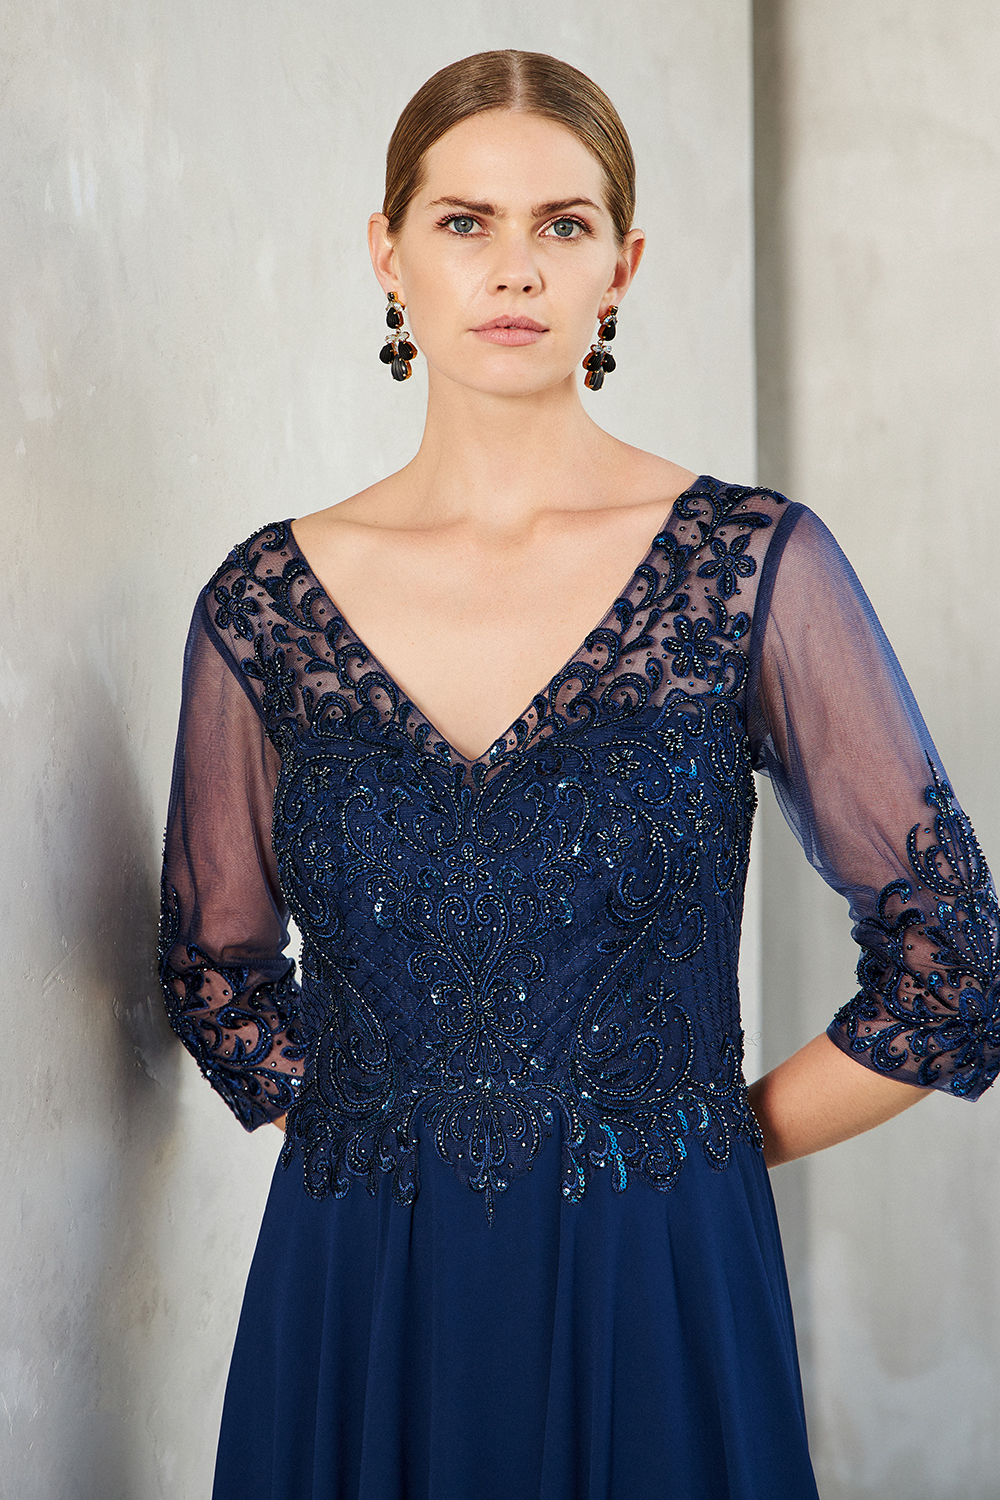 Классические платья / Long evening dress with chiffon fabric, lace and beading at the top and long sleeves